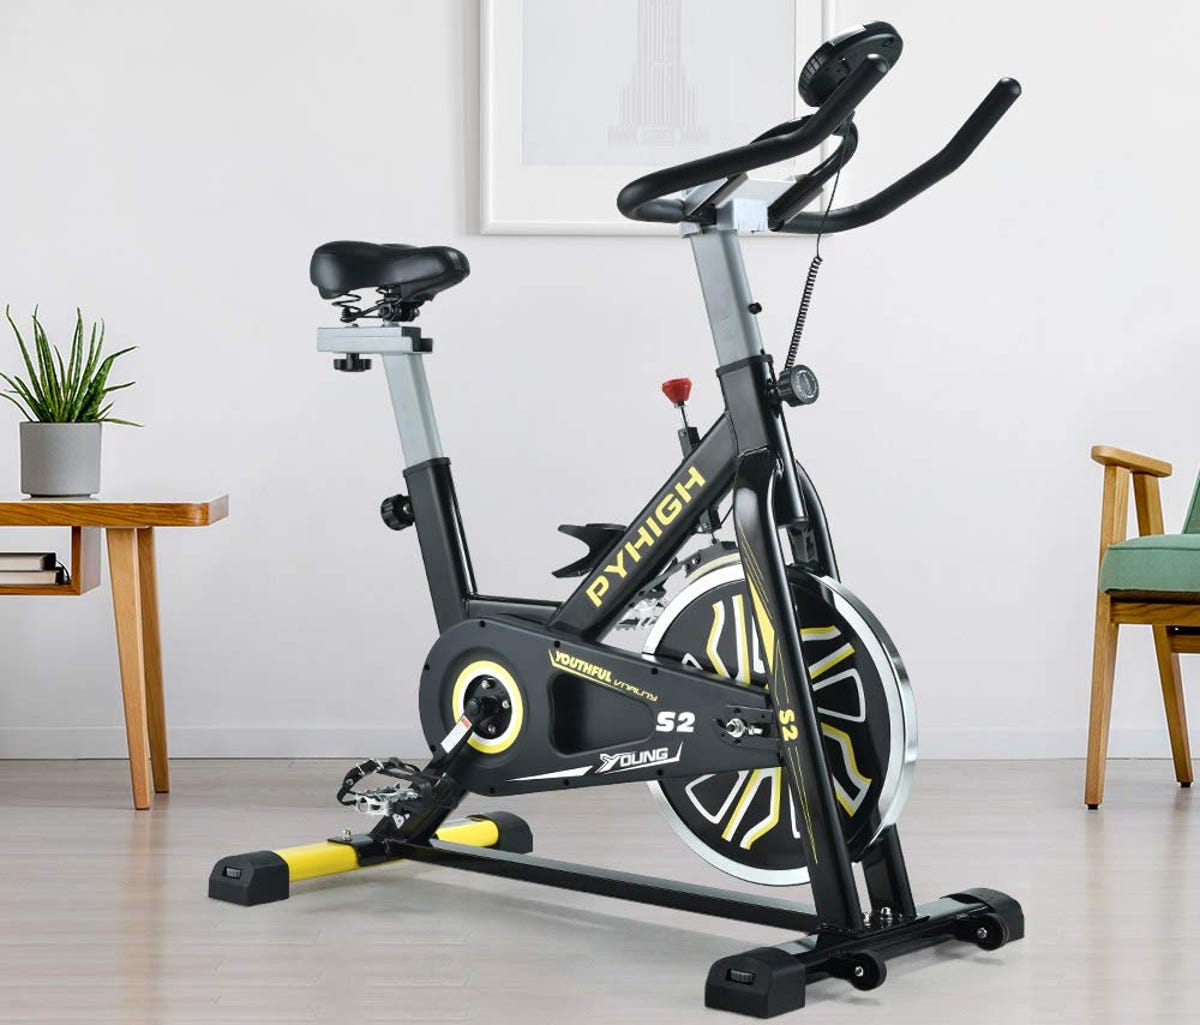 pyhigh-s2-indoor-exercise-bike.png